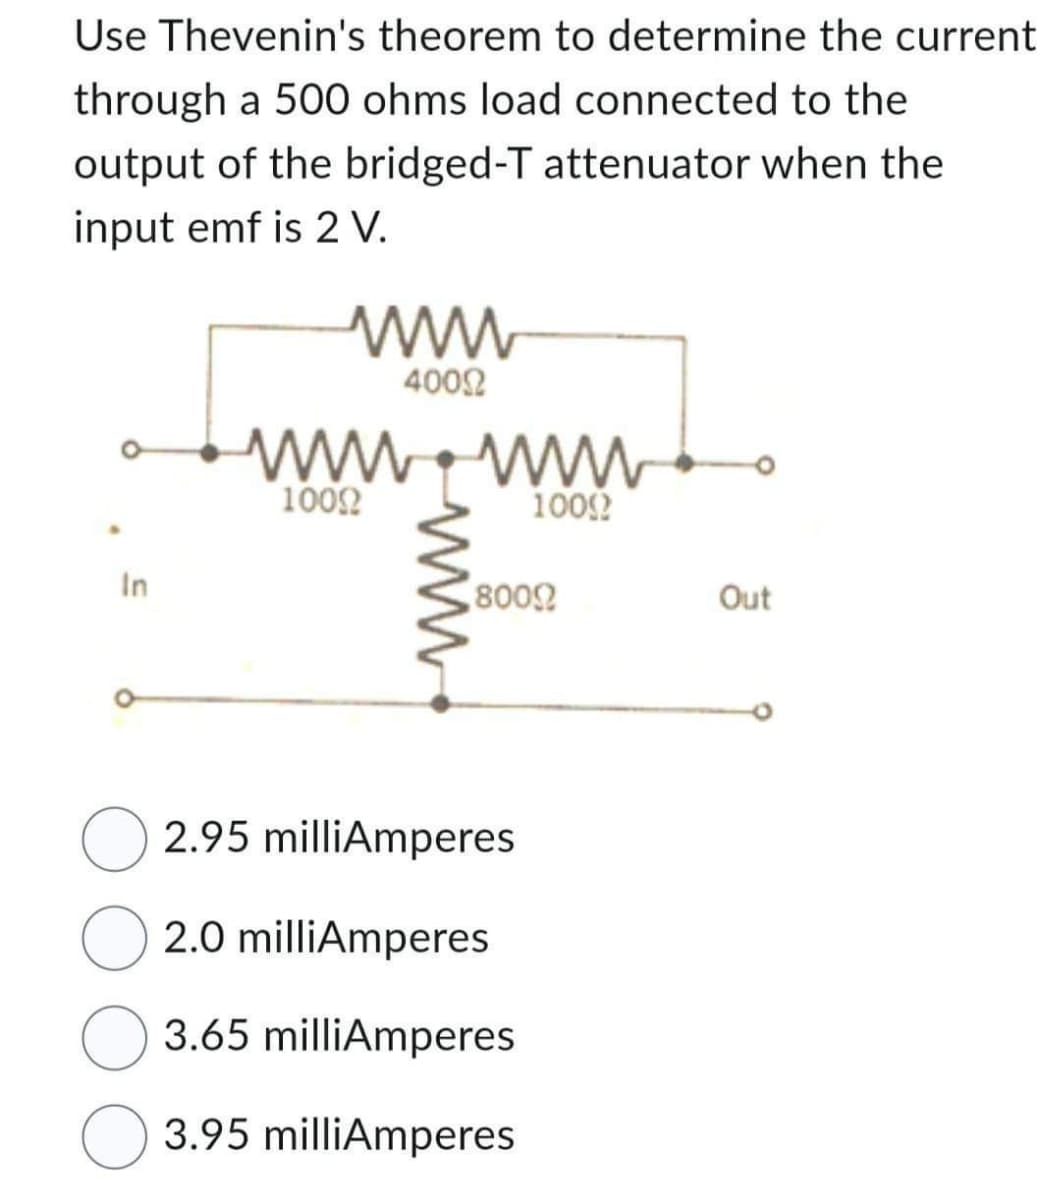 Use Thevenin's theorem to determine the current
through a 500 ohms load connected to the
output of the bridged-T attenuator when the
input emf is 2 V.
In
40022
www.www
10092
10092
80092
2.95 milliAmperes
2.0 milliAmperes
O 3.65 milliAmperes
3.95 milliAmperes
Out